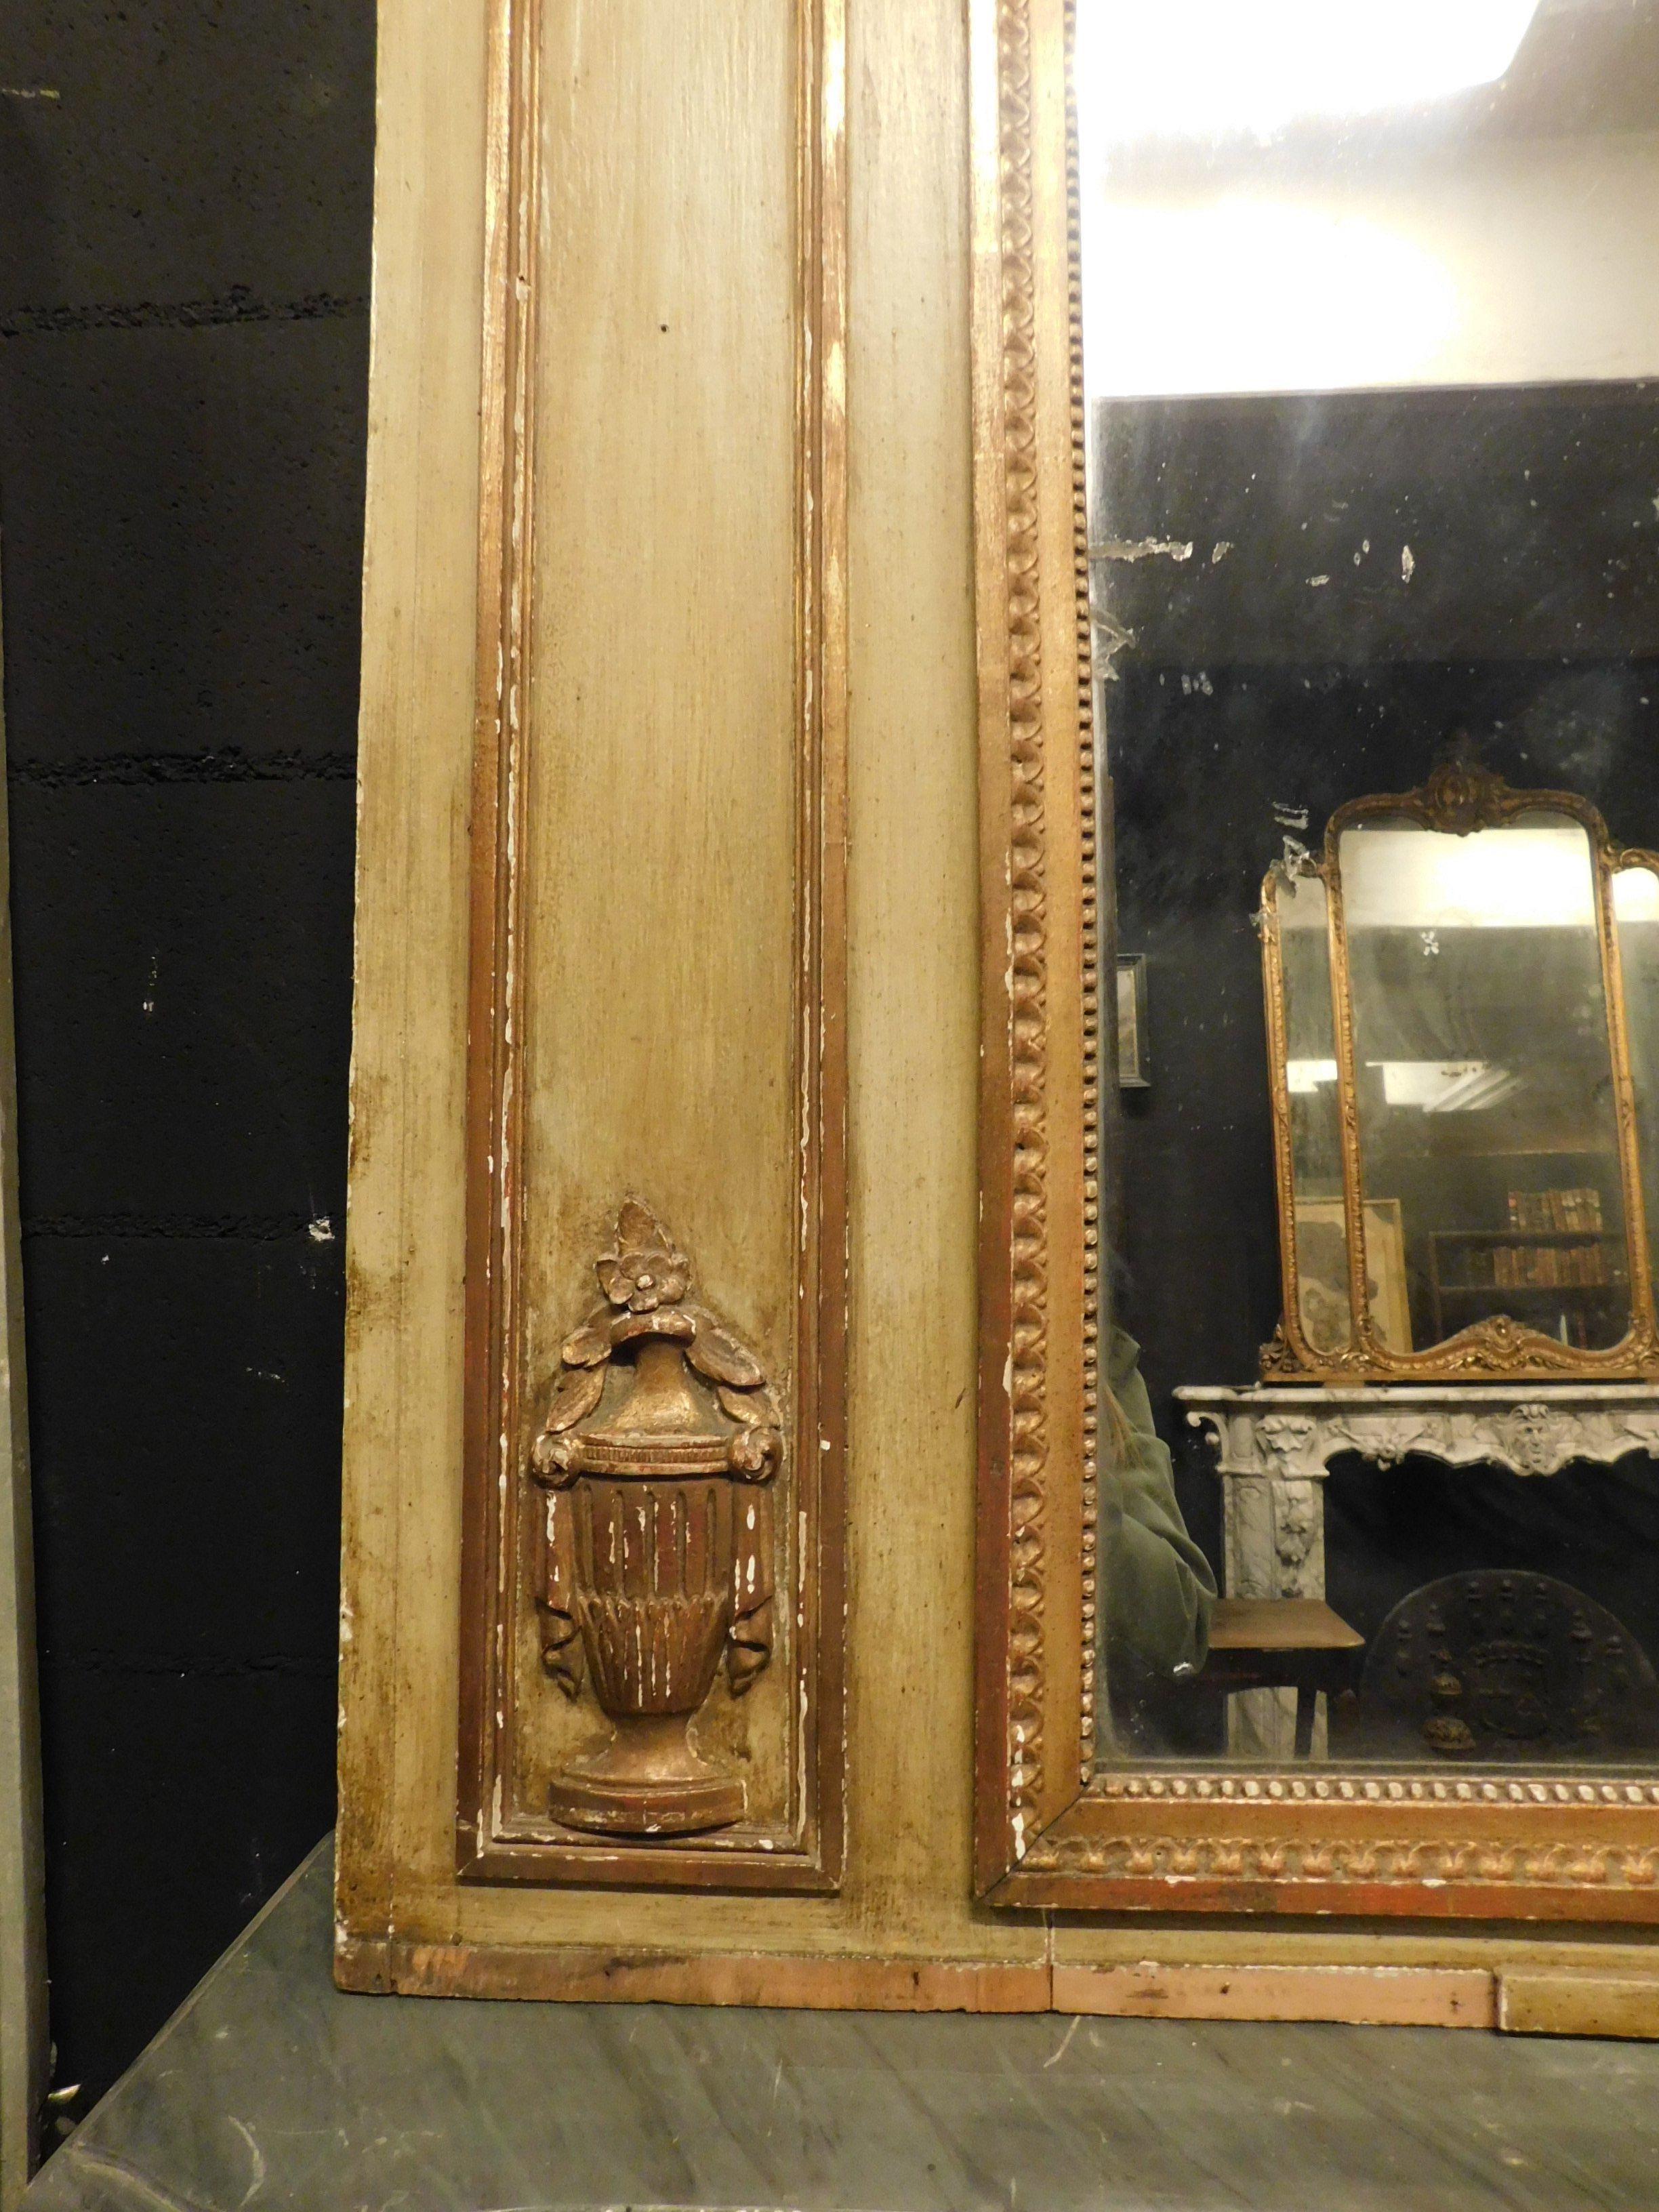 Wood Antique Gilded Louis XVI Mirror with Painting, Inspired by Art, France, 1700